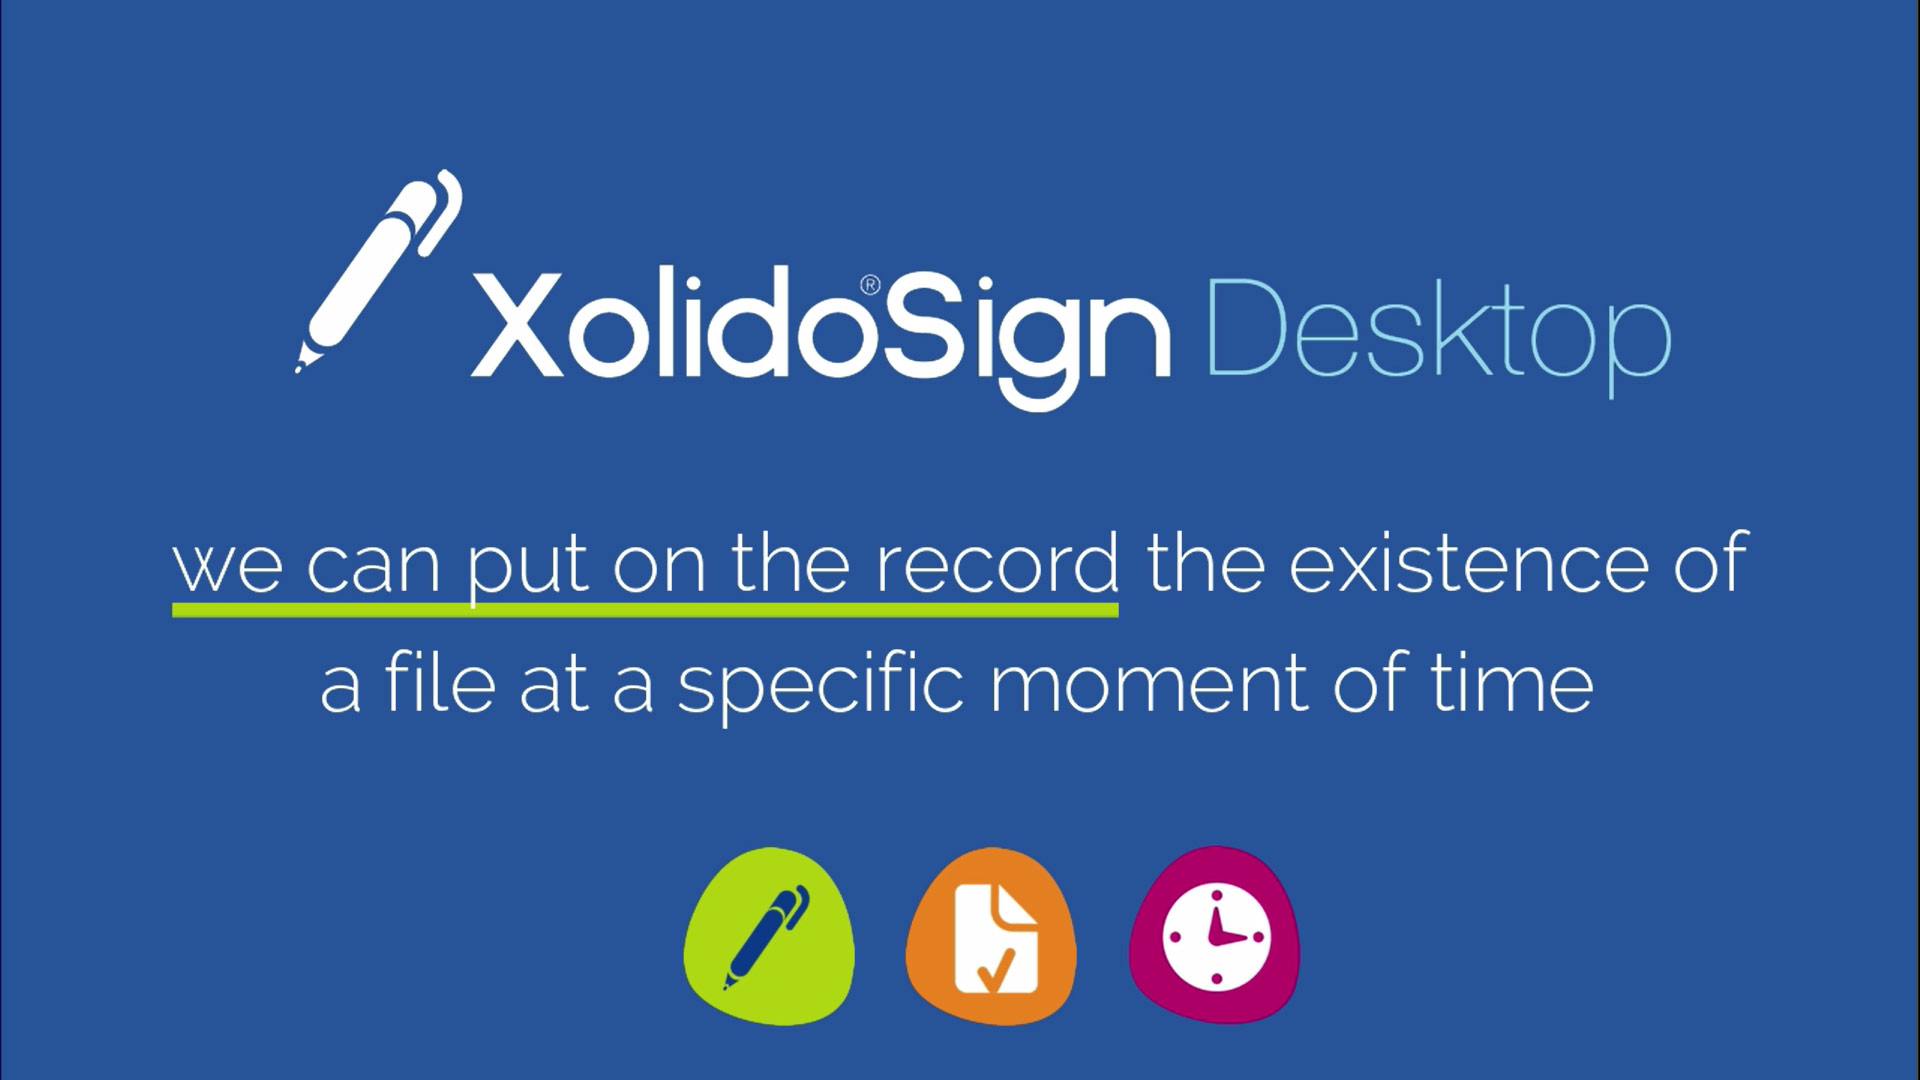 Recognized time-stamp with XolidoSign Desktop